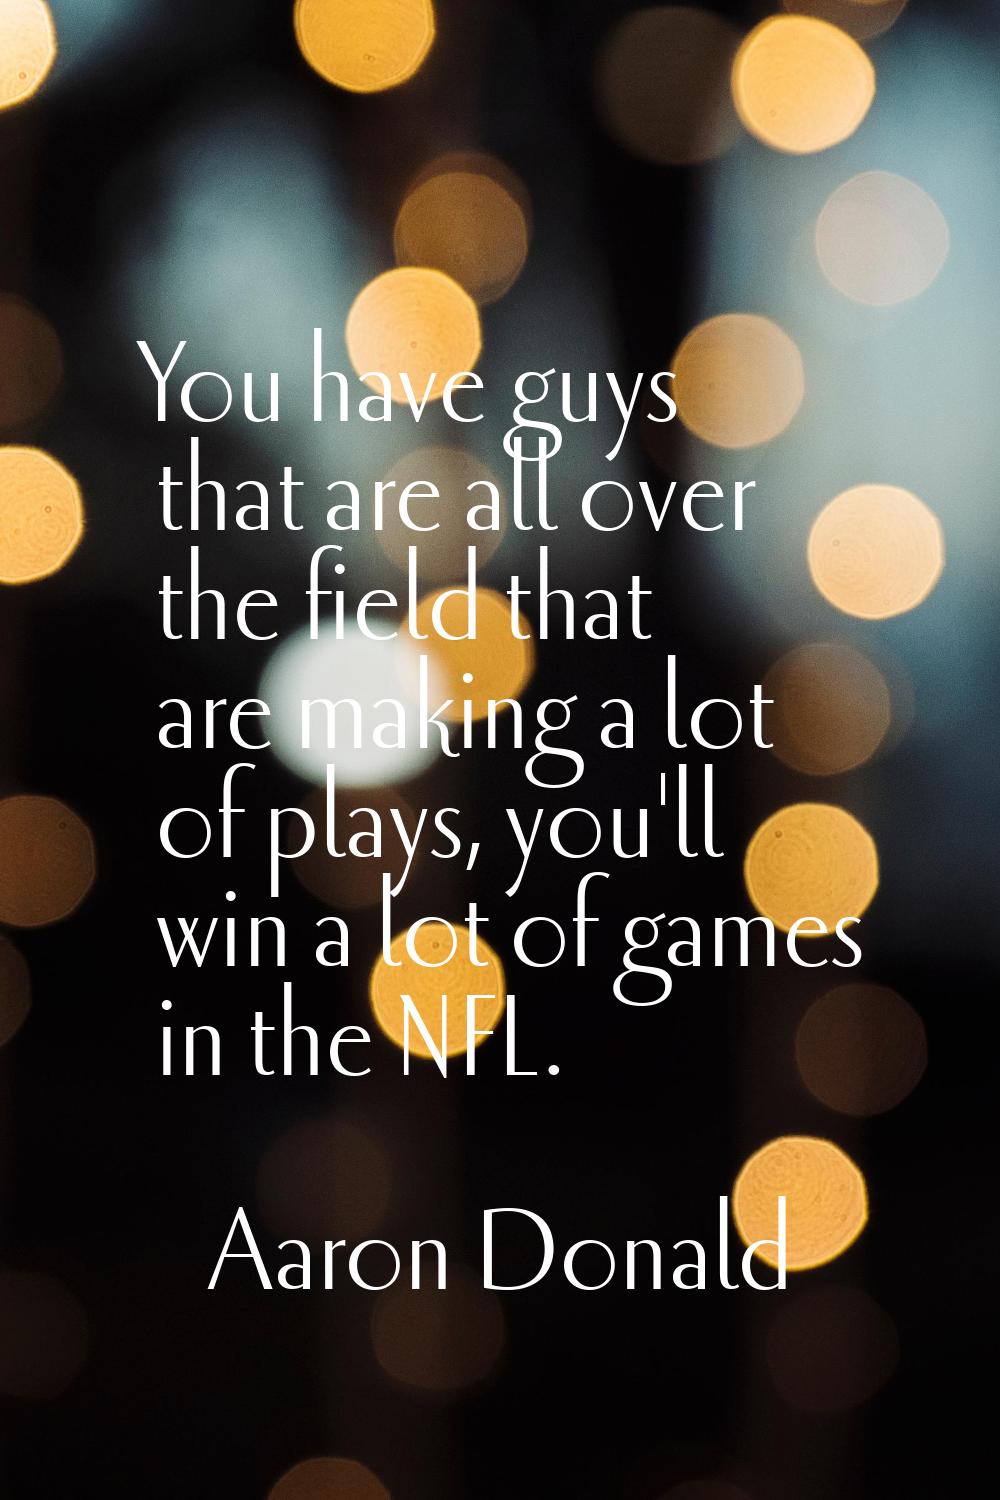 You have guys that are all over the field that are making a lot of plays, you'll win a lot of games